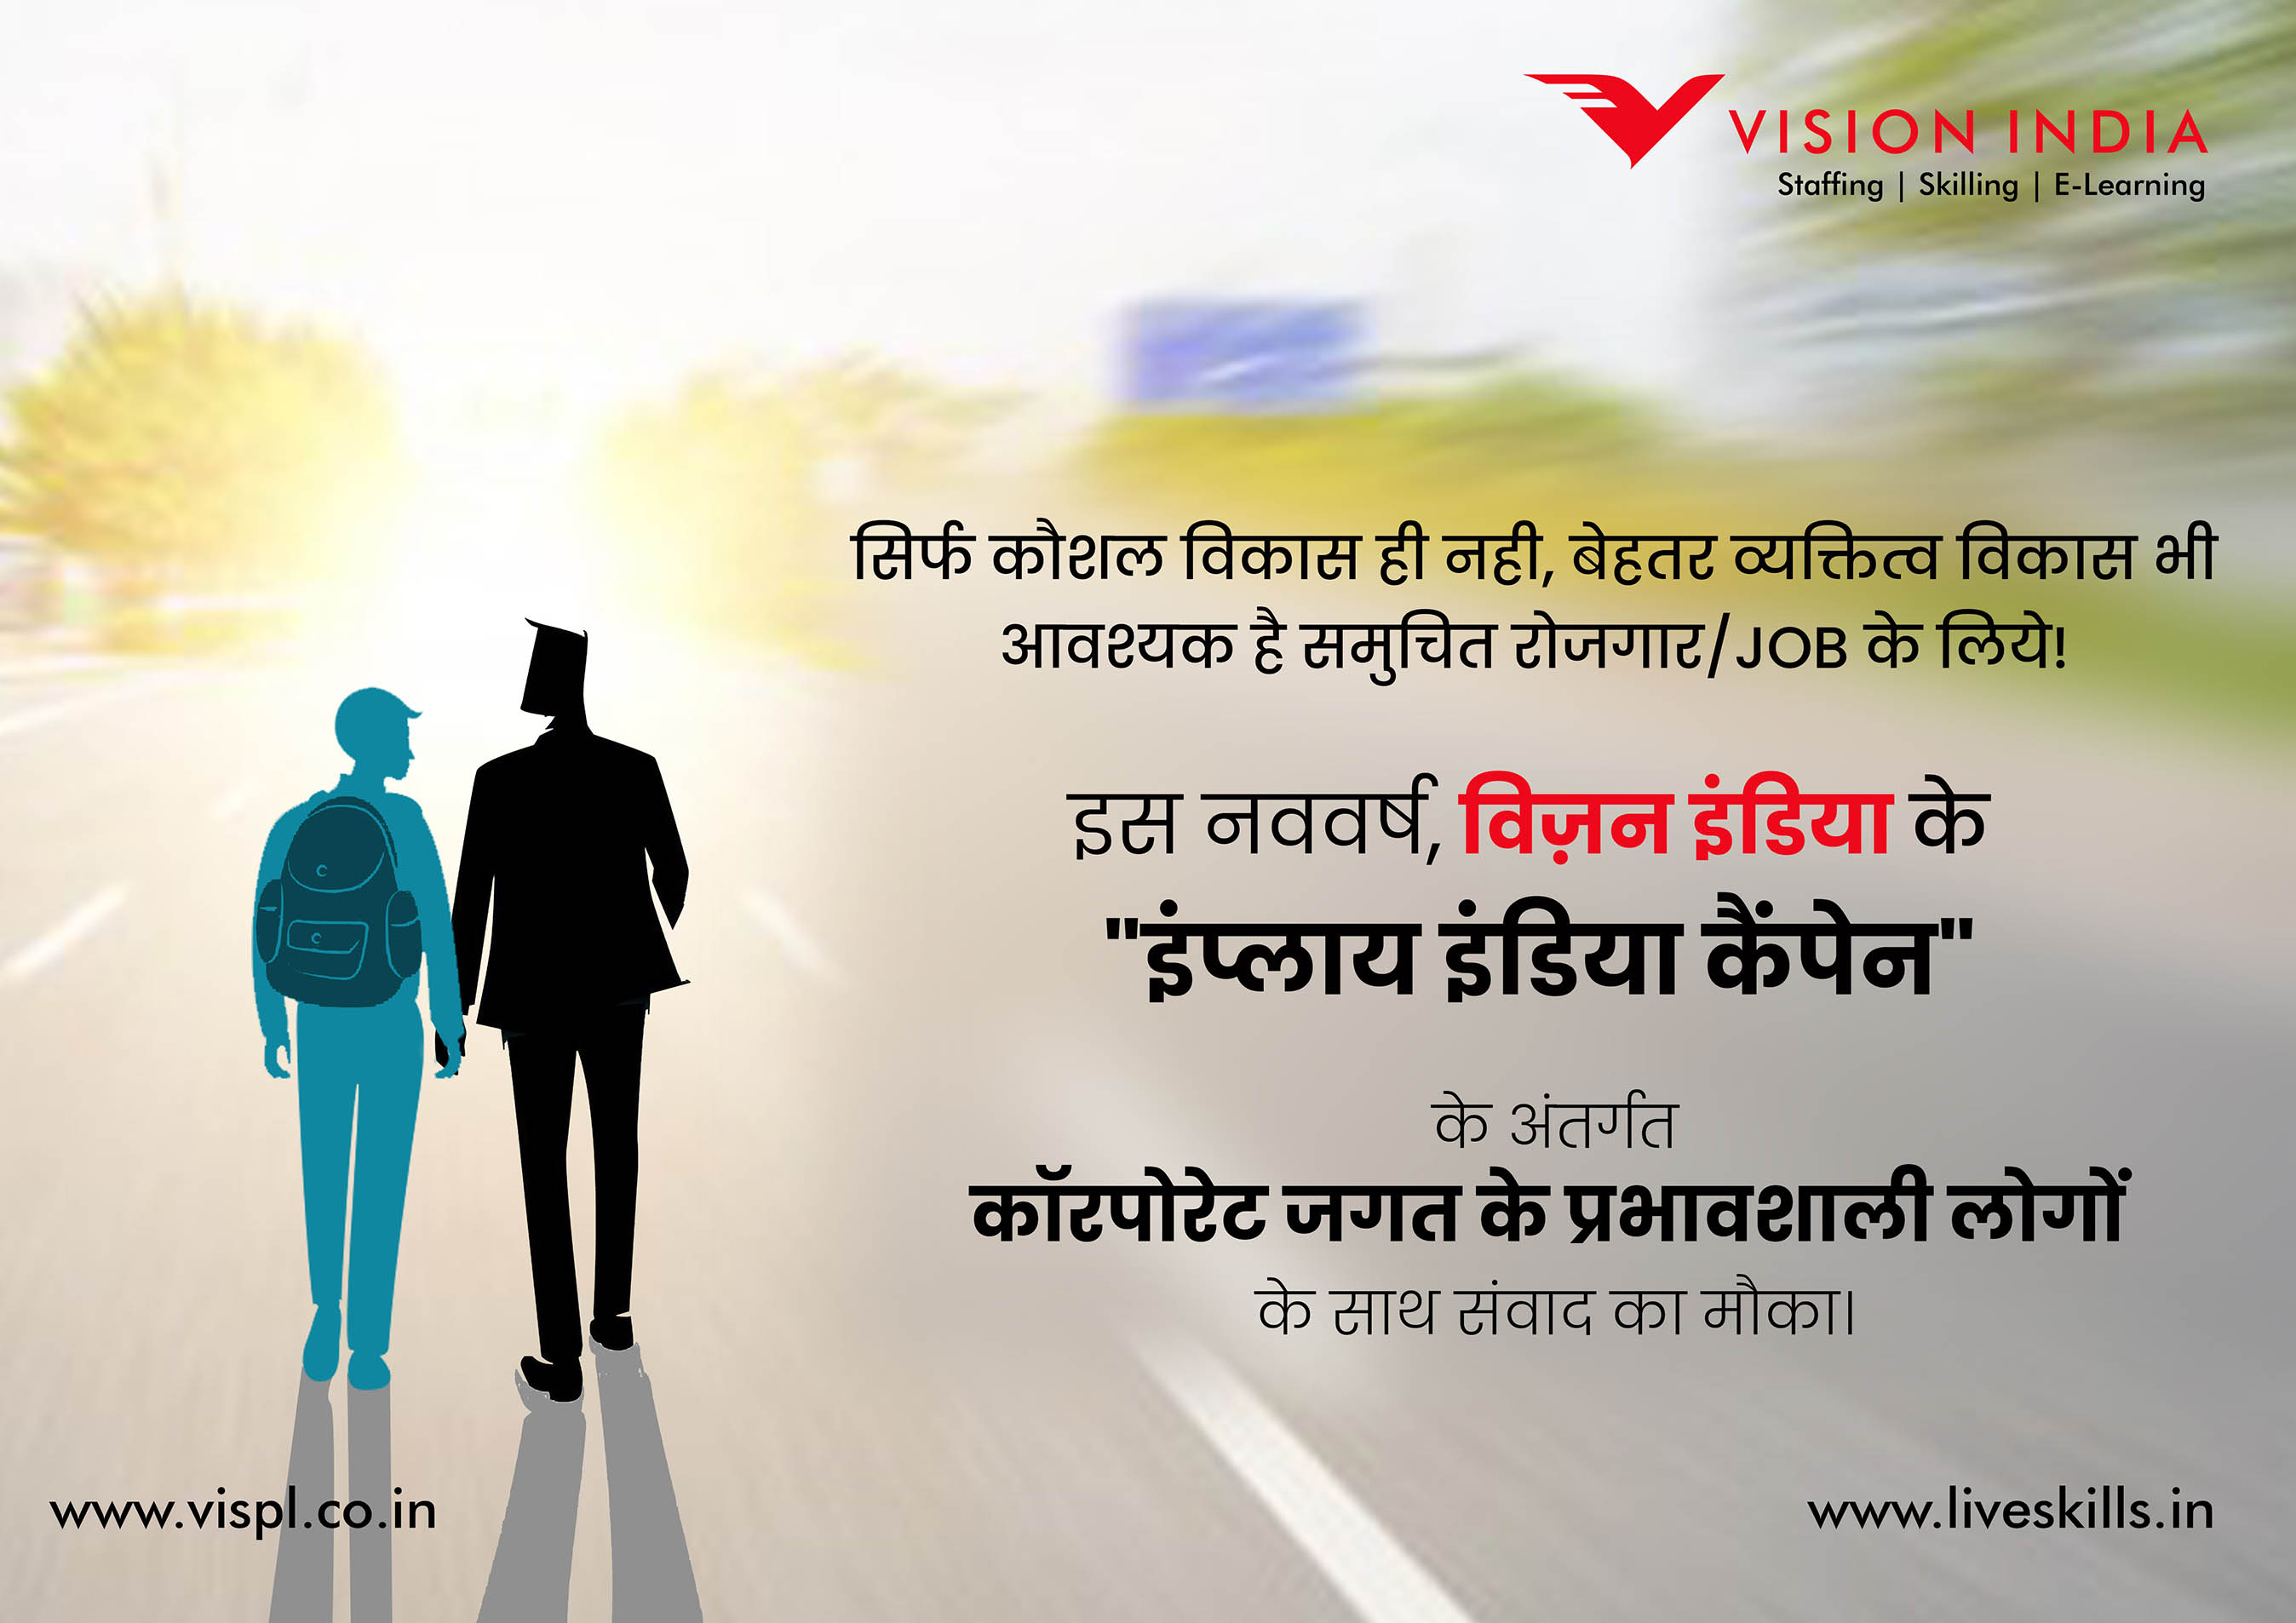 Vision India Services